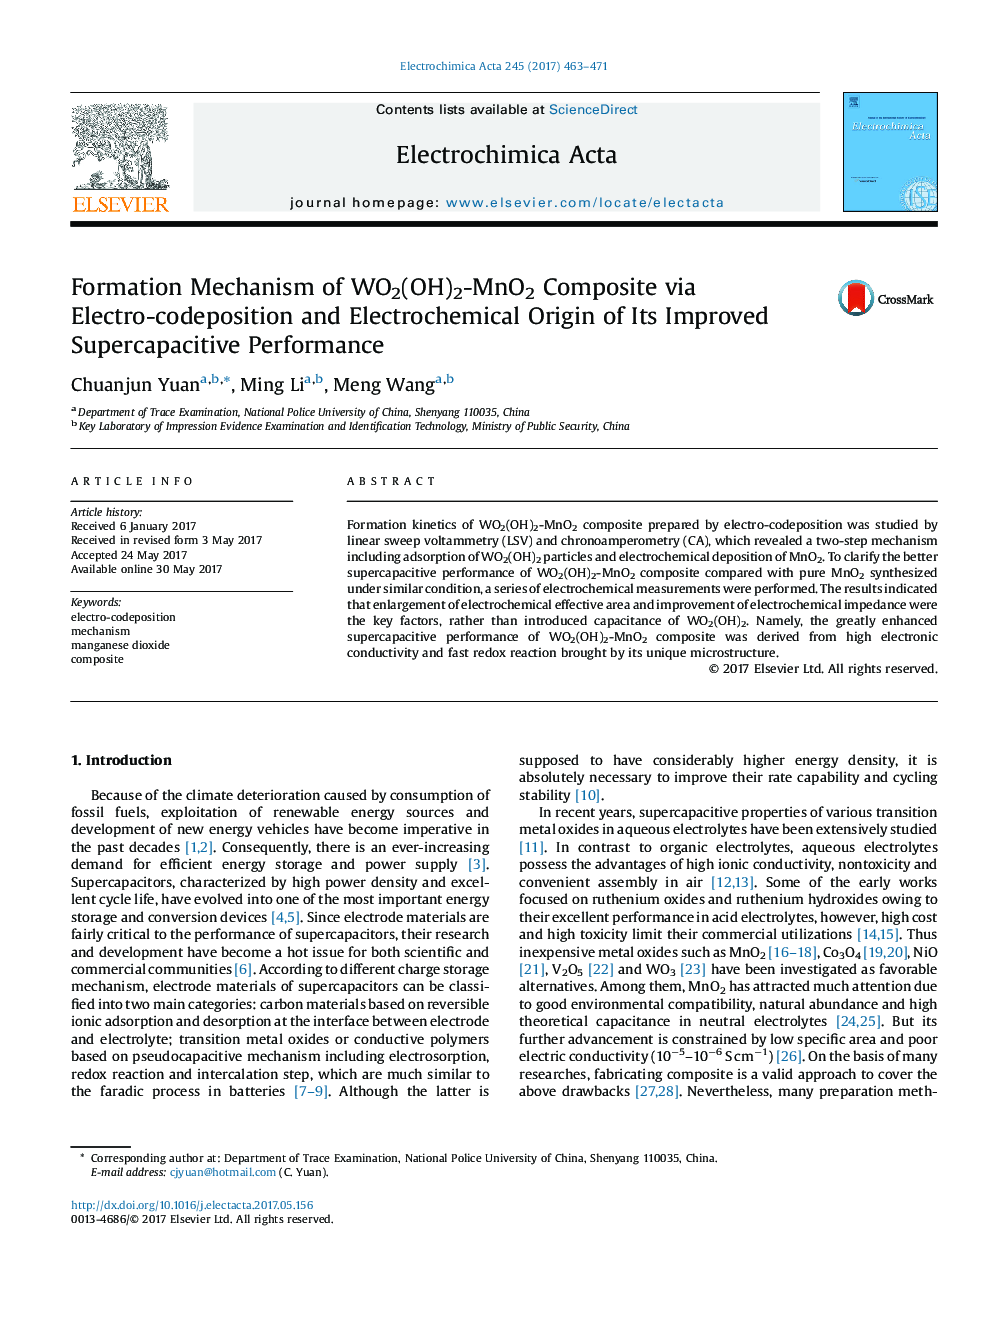 Formation Mechanism of WO2(OH)2-MnO2 Composite via Electro-codeposition and Electrochemical Origin of Its Improved Supercapacitive Performance